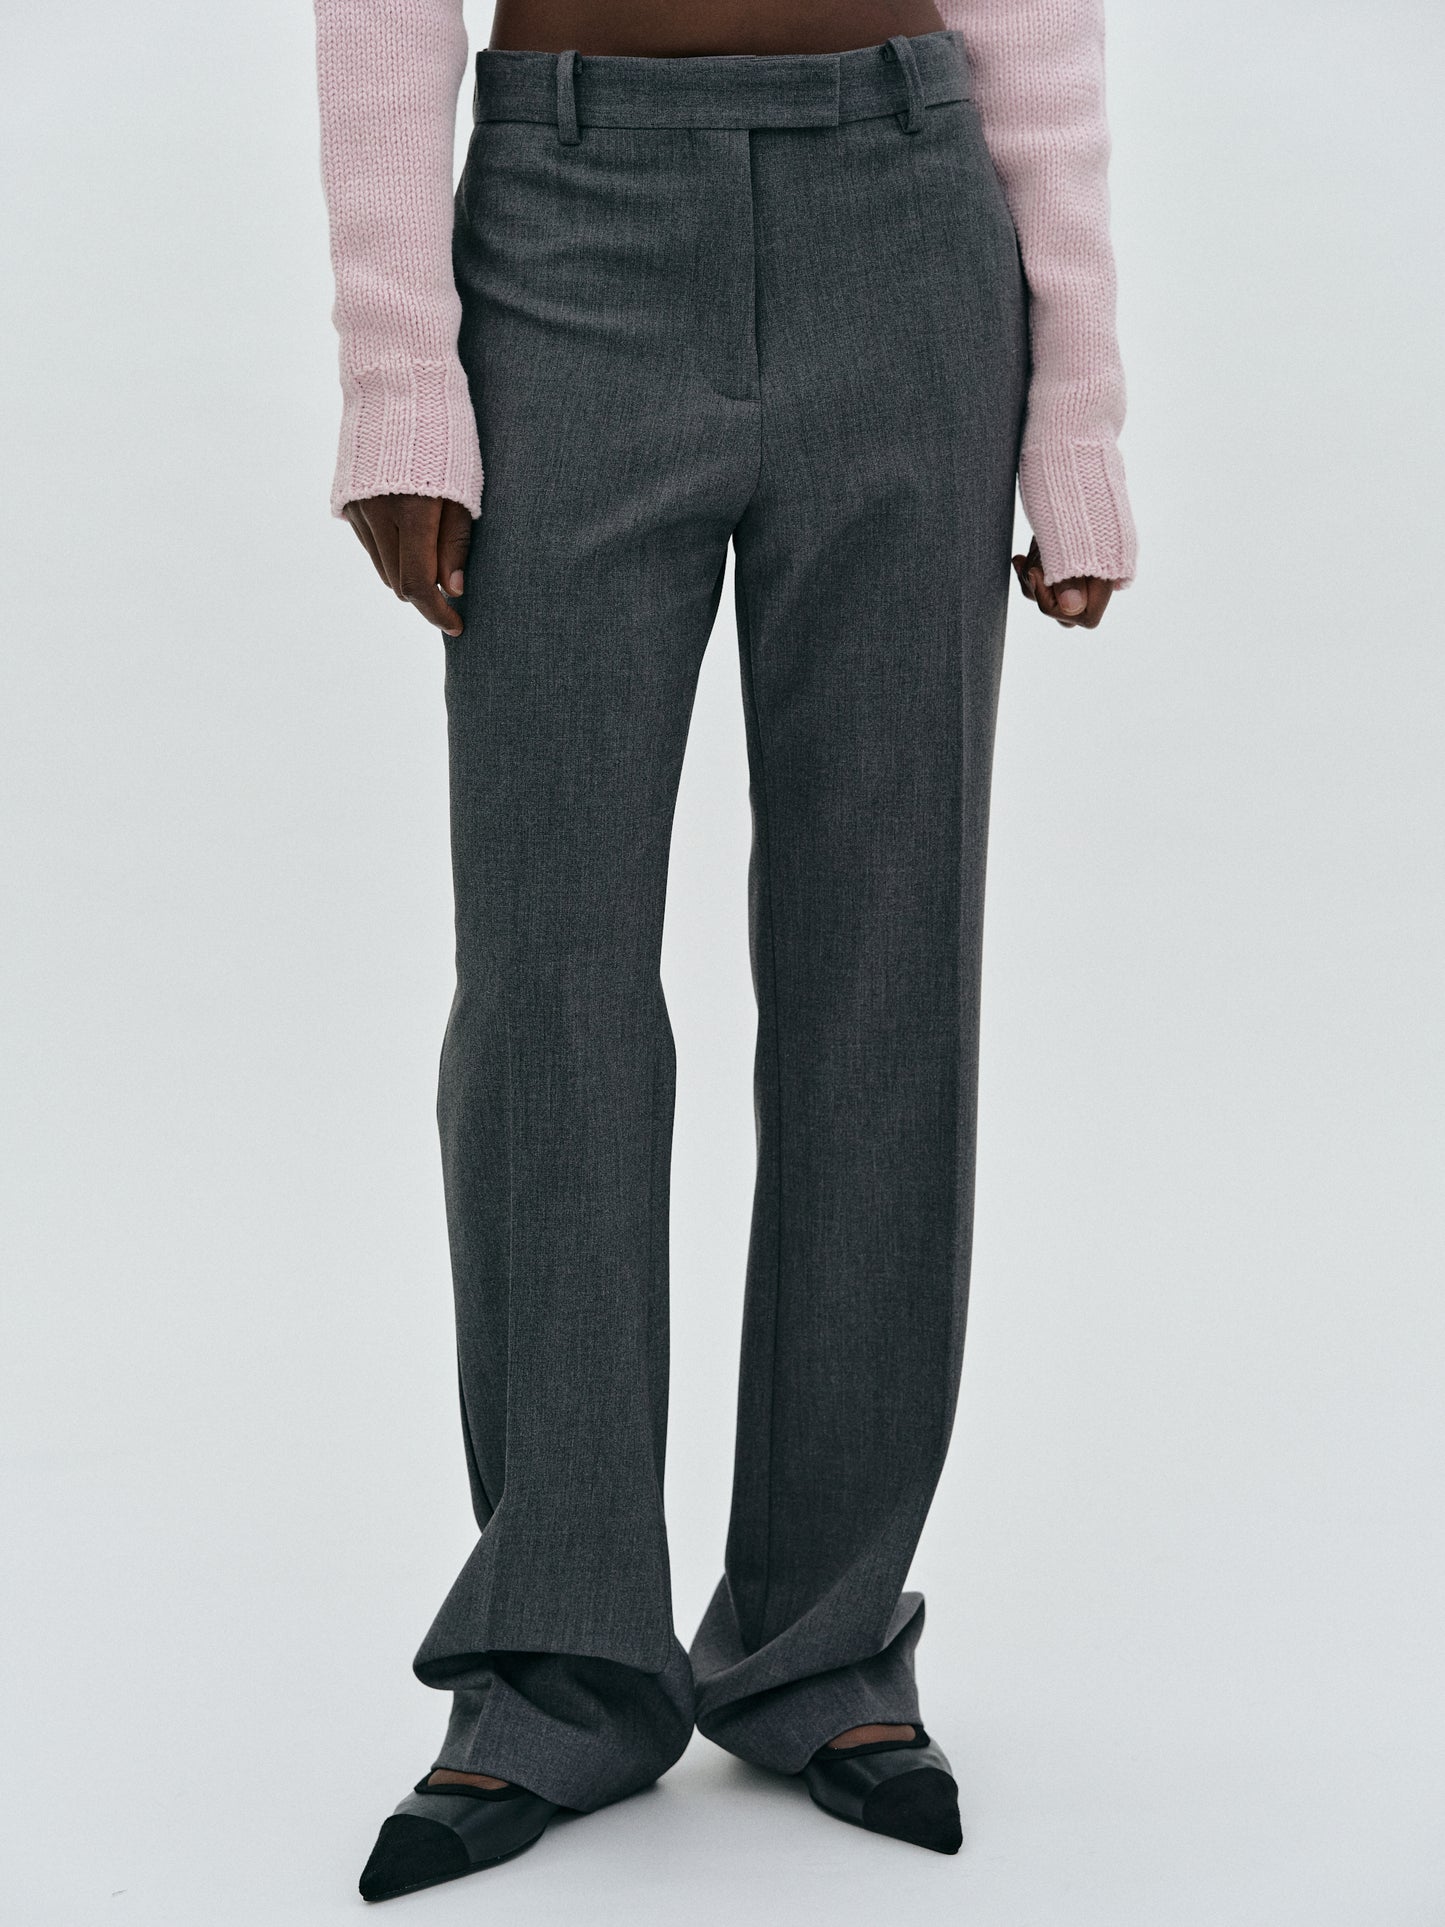 Full-Length Suit Trousers, Charcoal Grey